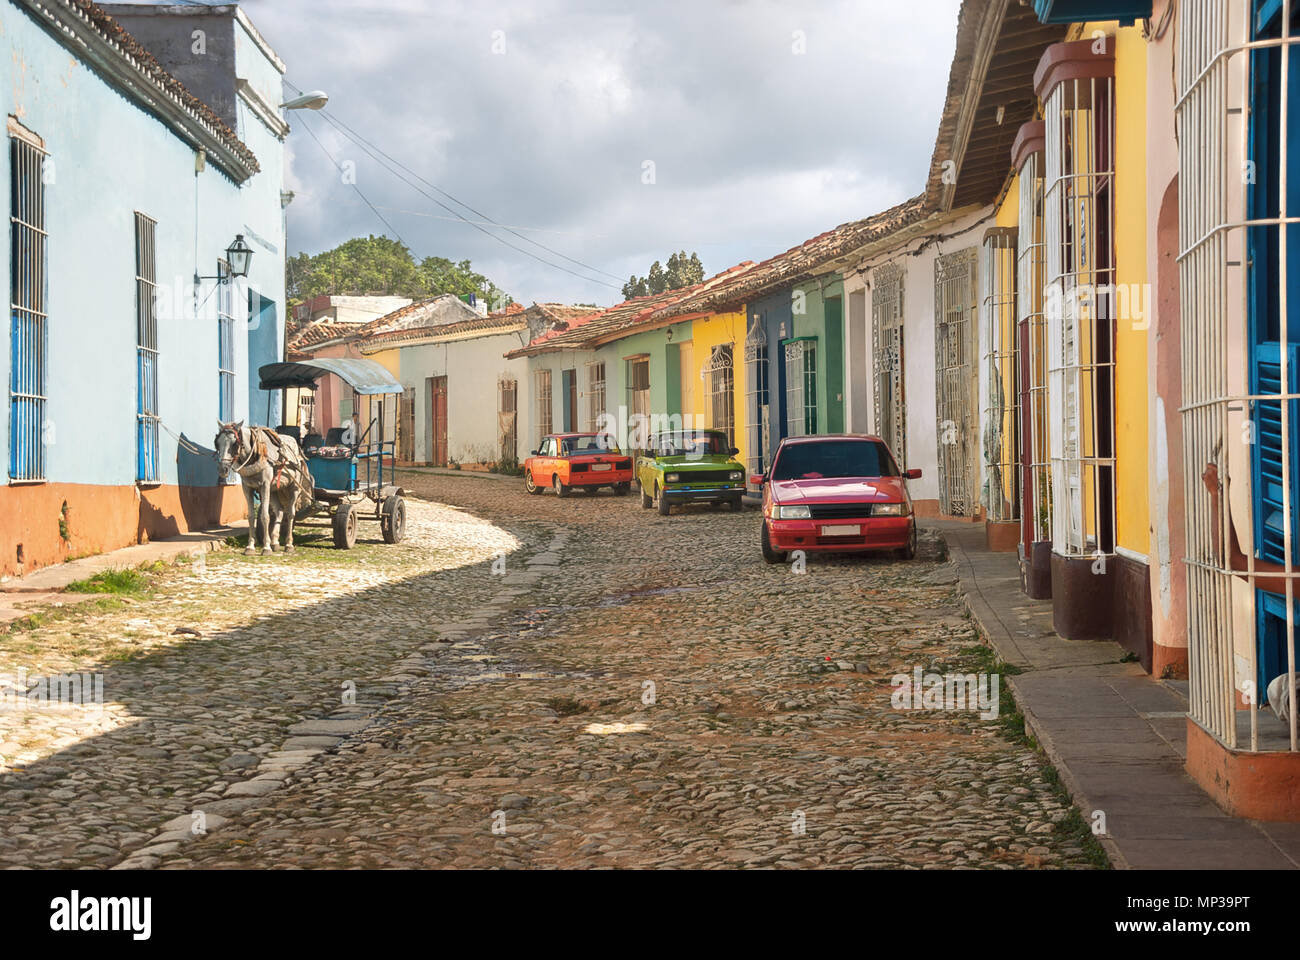 Colored facades of colonial buildings on the streets of Latin American Trinidad. Stock Photo